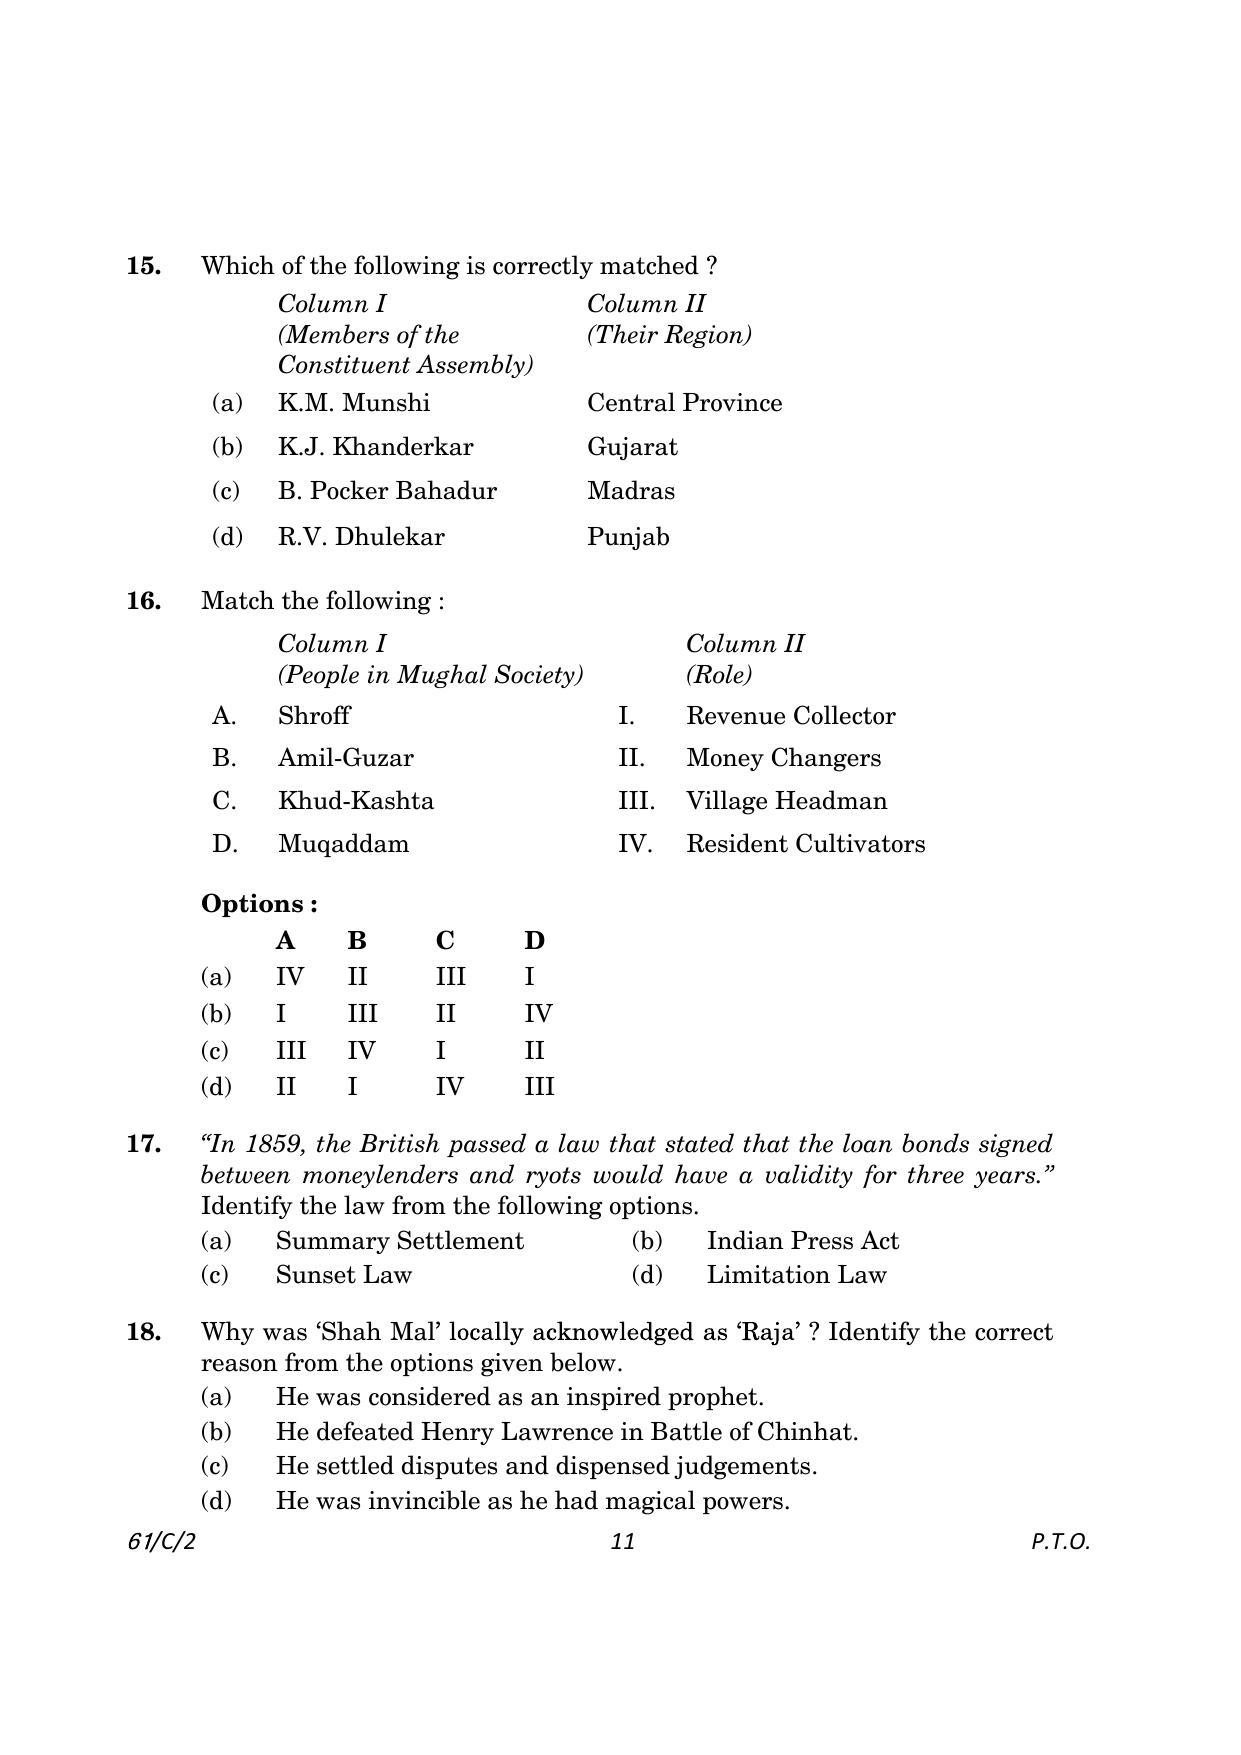 CBSE Class 12 61-2 History 2023 (Compartment) Question Paper - Page 11